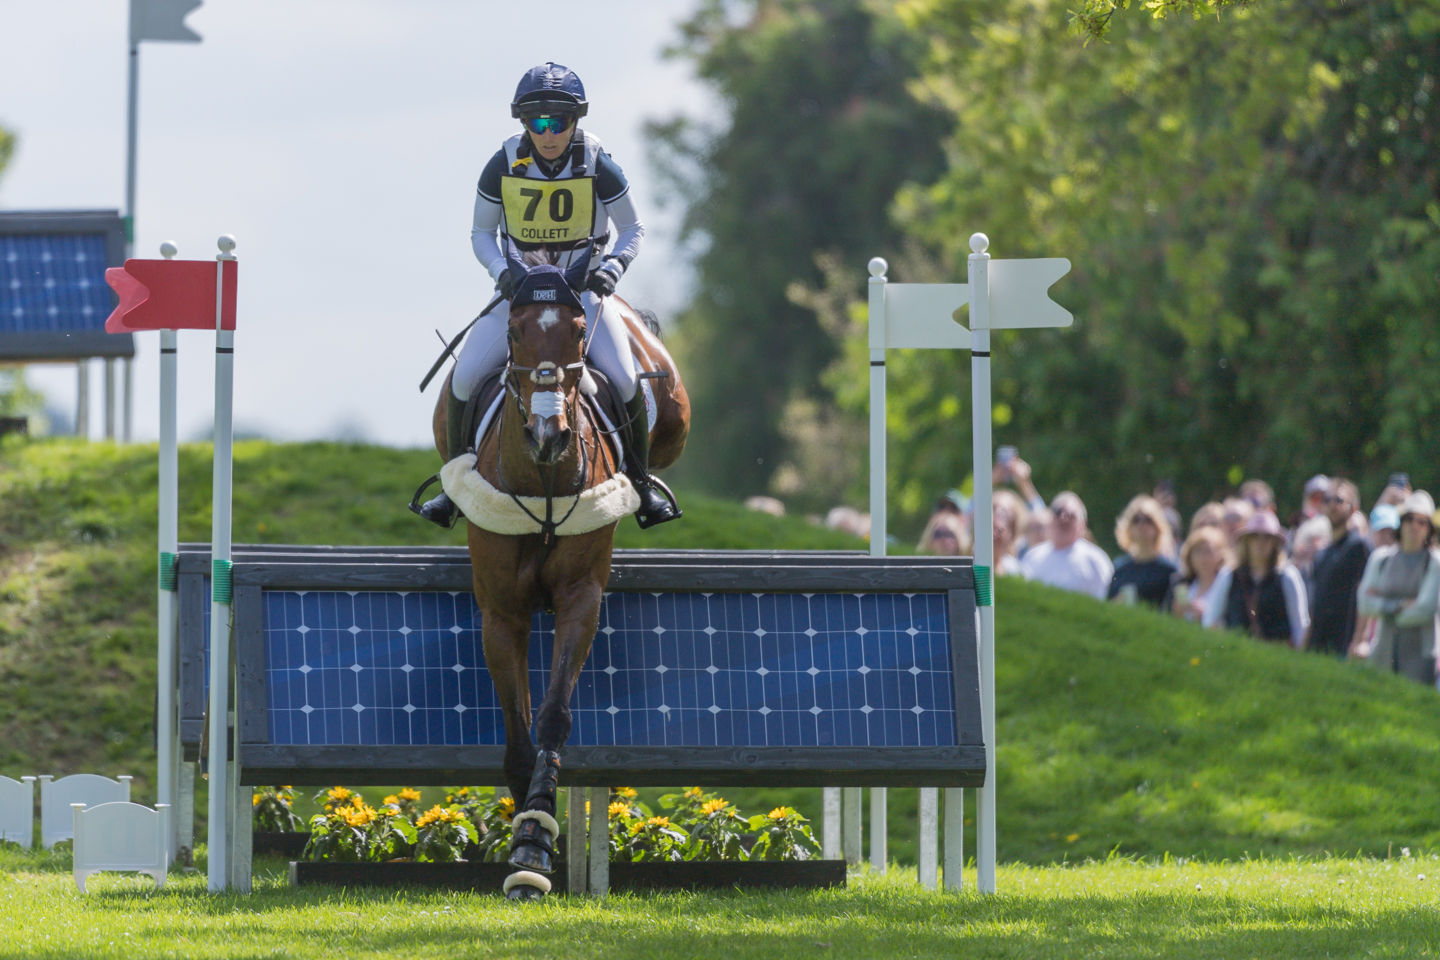 Badminton top 10 in pictures Laura Collett maintains overnight lead after relentless cross-country day